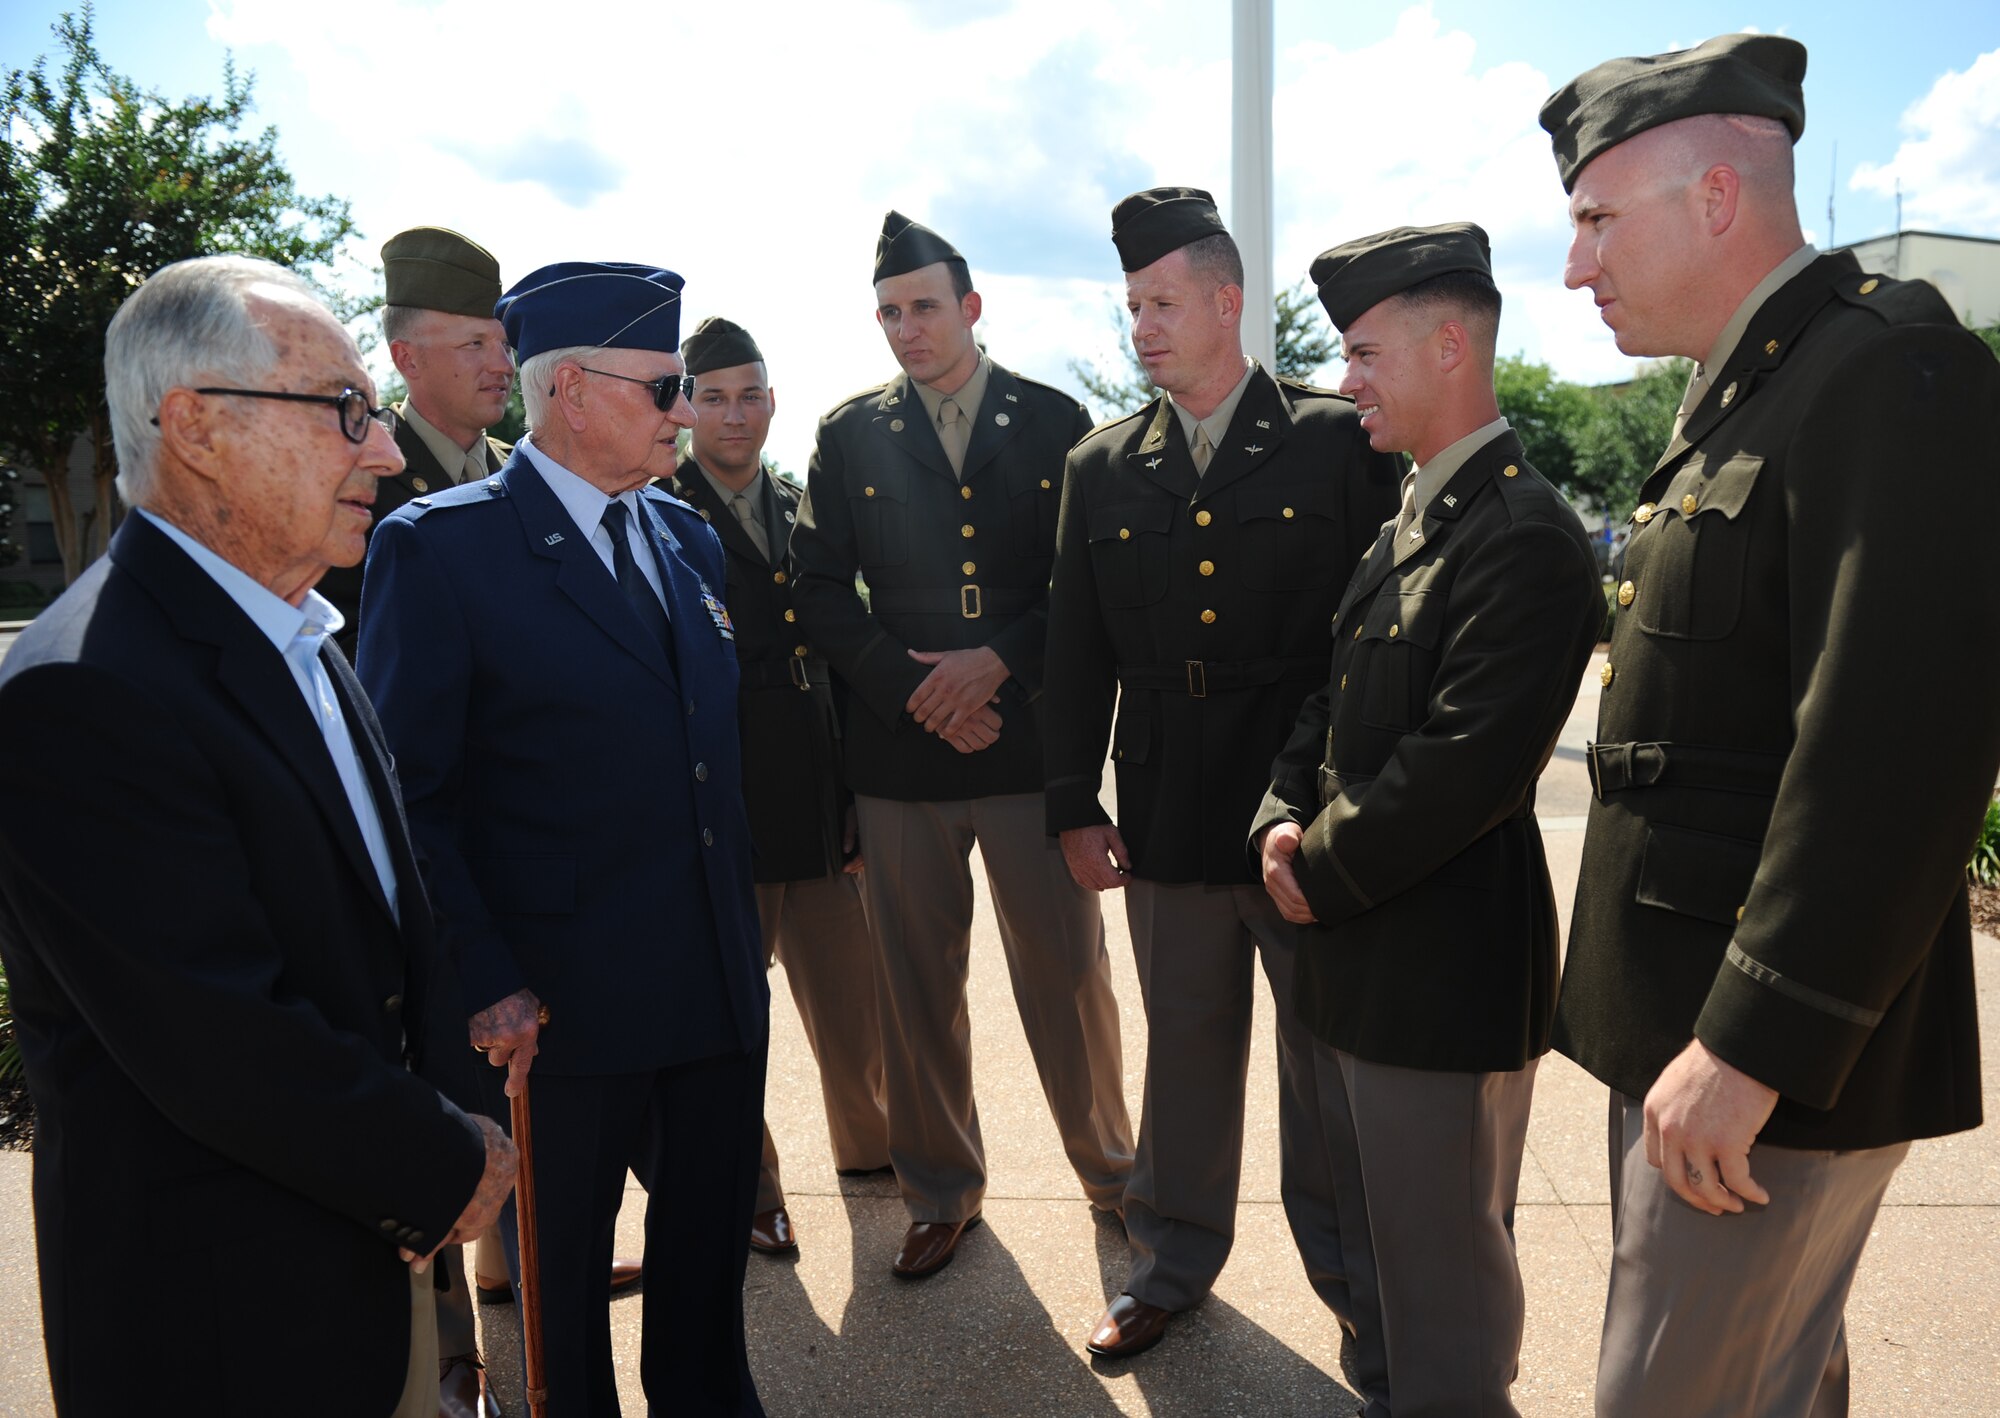 Lt. Col. Henry Burkle and Chief Warrant Officer Thomas Adams, Jr., both retired and stationed at Keesler during WORLD WAR II, speak to 81st Security Forces Squadron Combat Arms Training and Maintenance members during the Lt. Samuel Reeves Keesler, Jr. Memorial Retreat Ceremony May 13, 2016, Keesler Air Force Base, Miss. The event was held in honor of Lt. Keesler’s date of entry into the Army Air Service 99 years ago. The retreat ceremony is part of a year-long celebration of Lt. Keesler, a Mississippi native and WORLD WAR I hero, and the 75th anniversary of the opening of the base. (U.S. Air Force photo by Kemberly Groue)